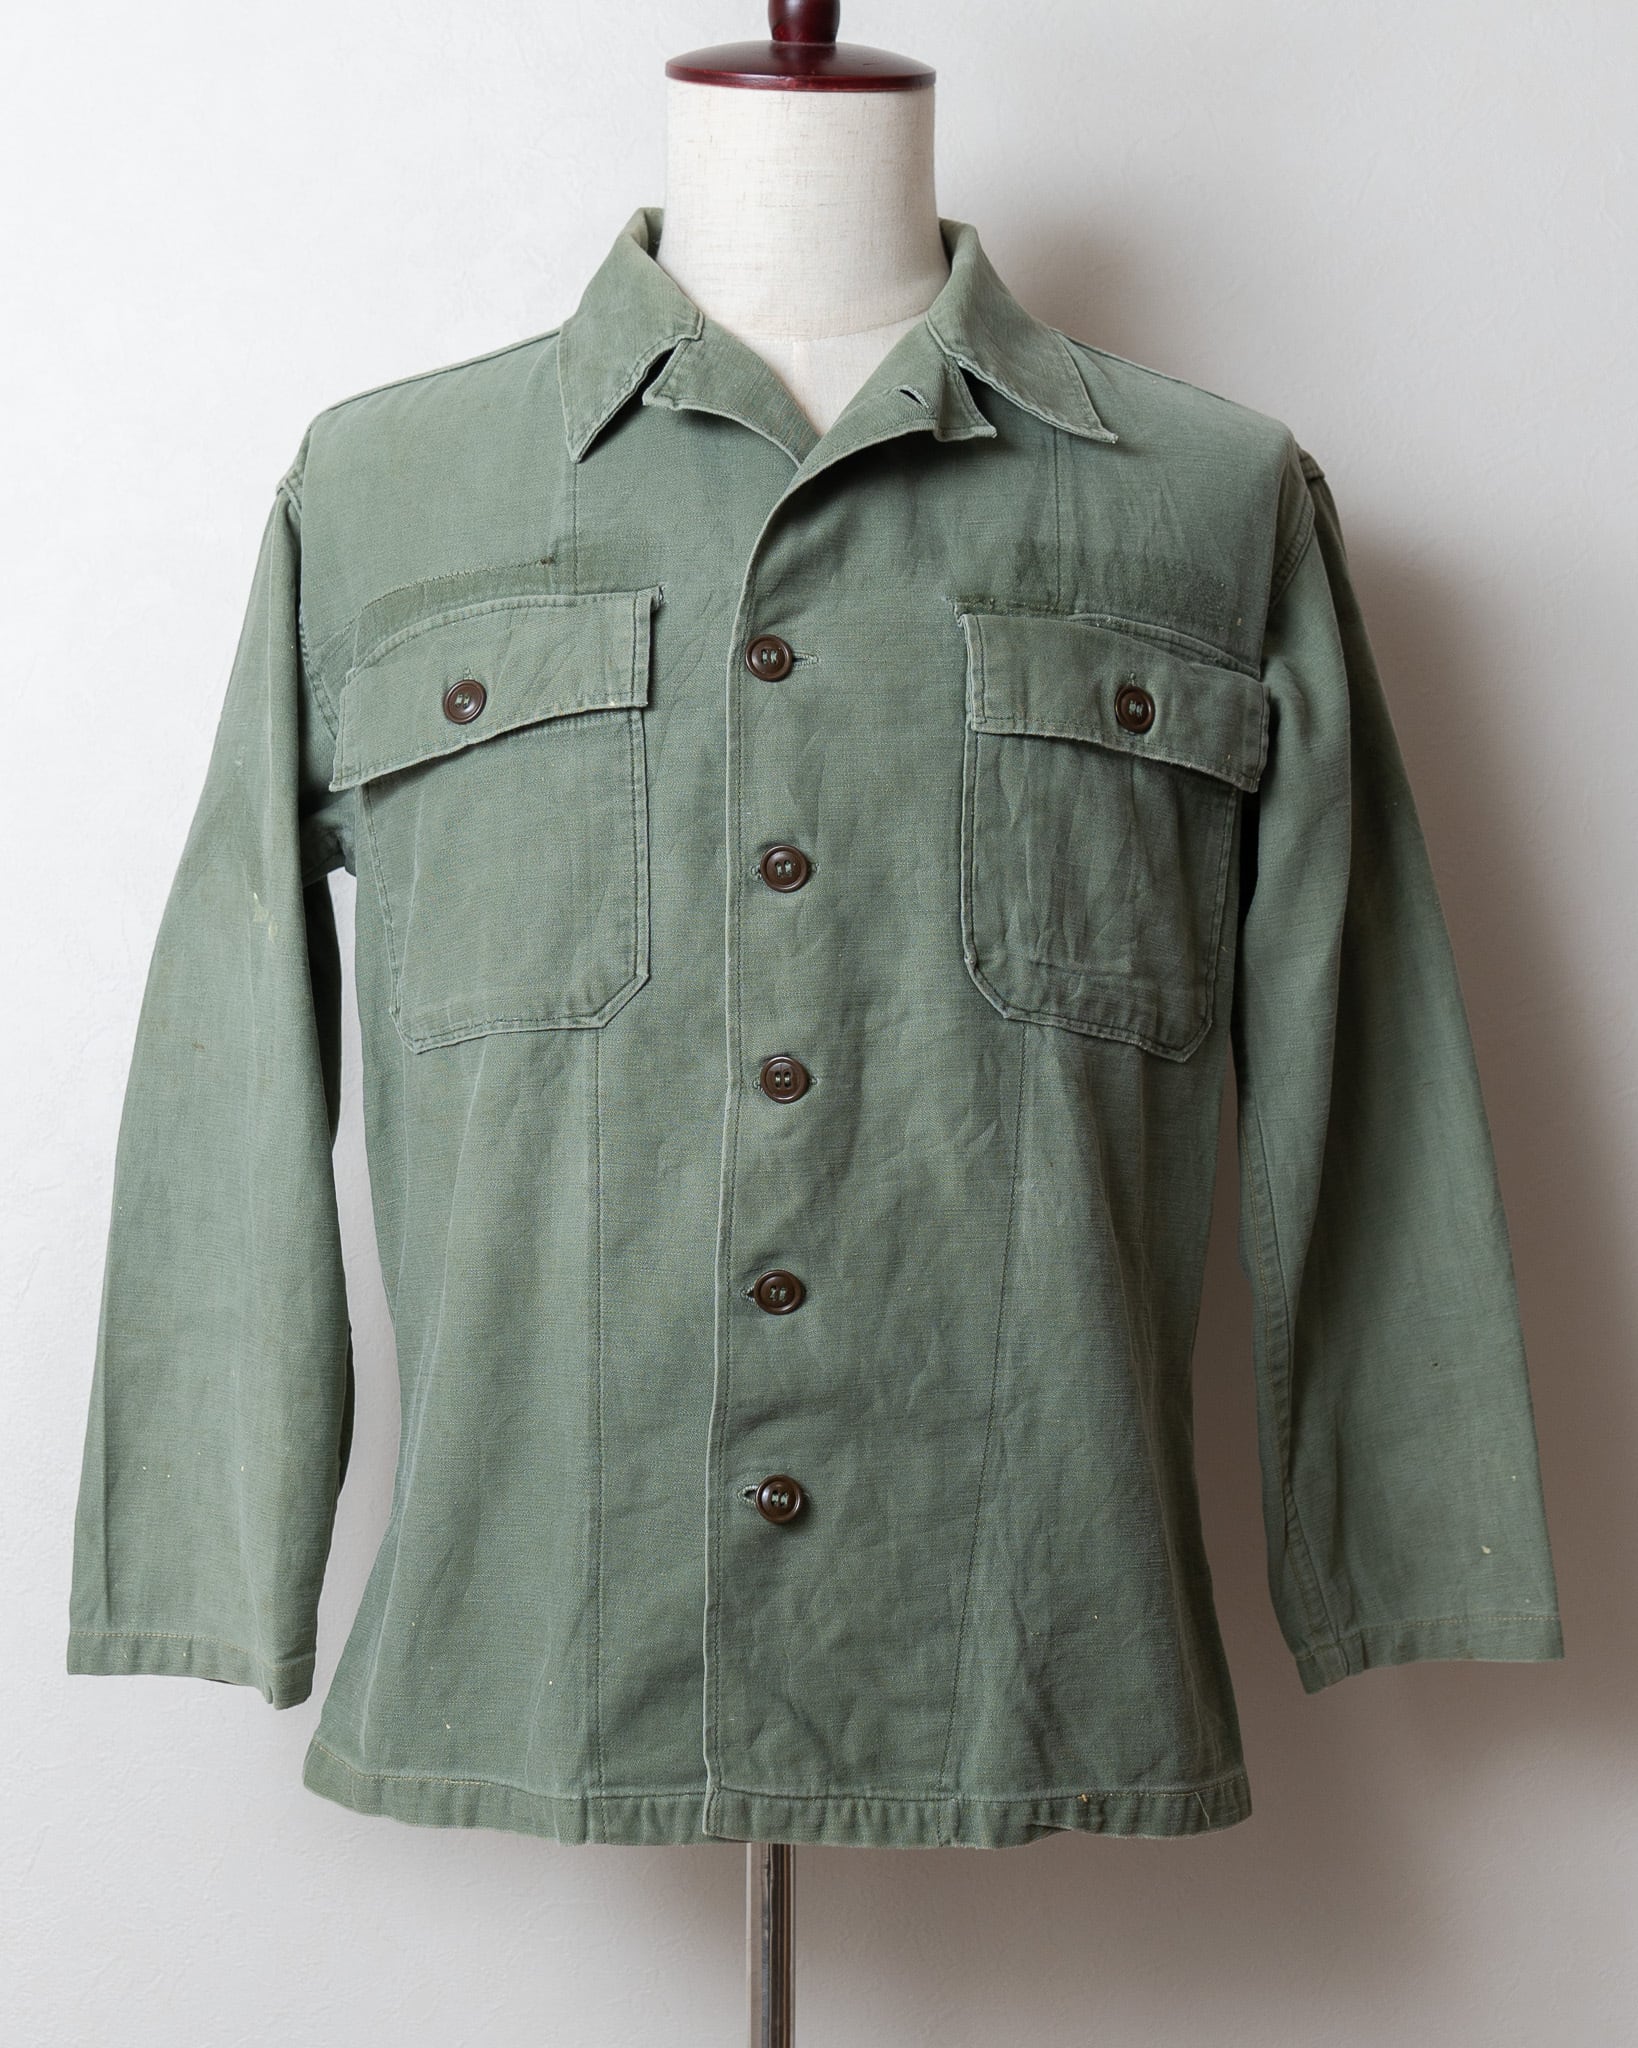 X-SMALL】U.S.Army 50's OG-107 Utility Shirt Cotton100％ 1st Type